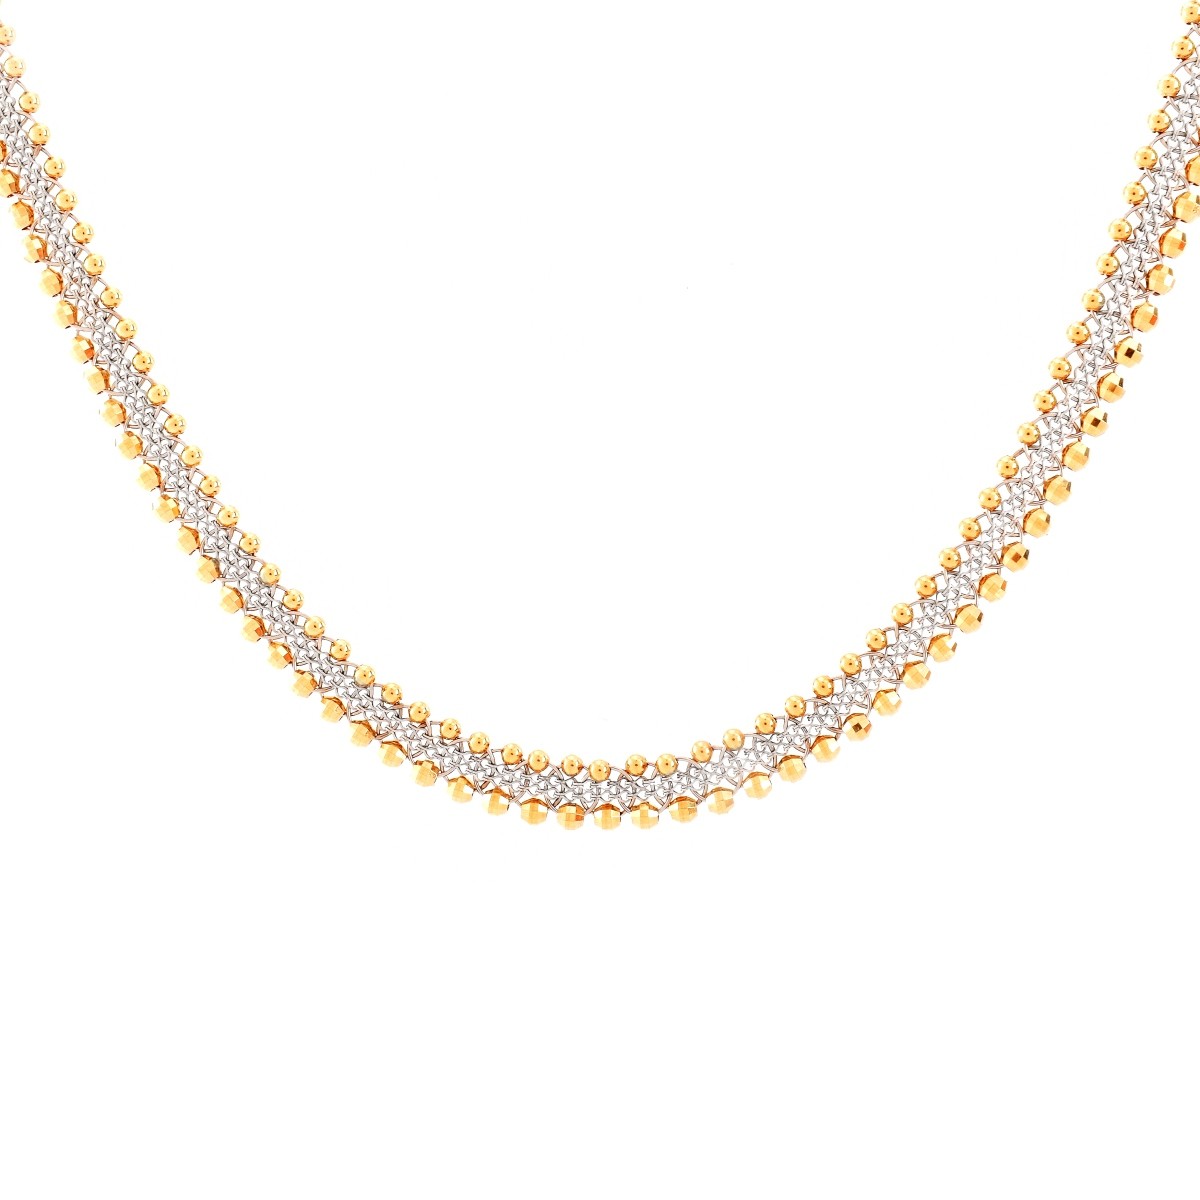 Vintage Platinum and 18K Gold Chain - Image 2 of 4